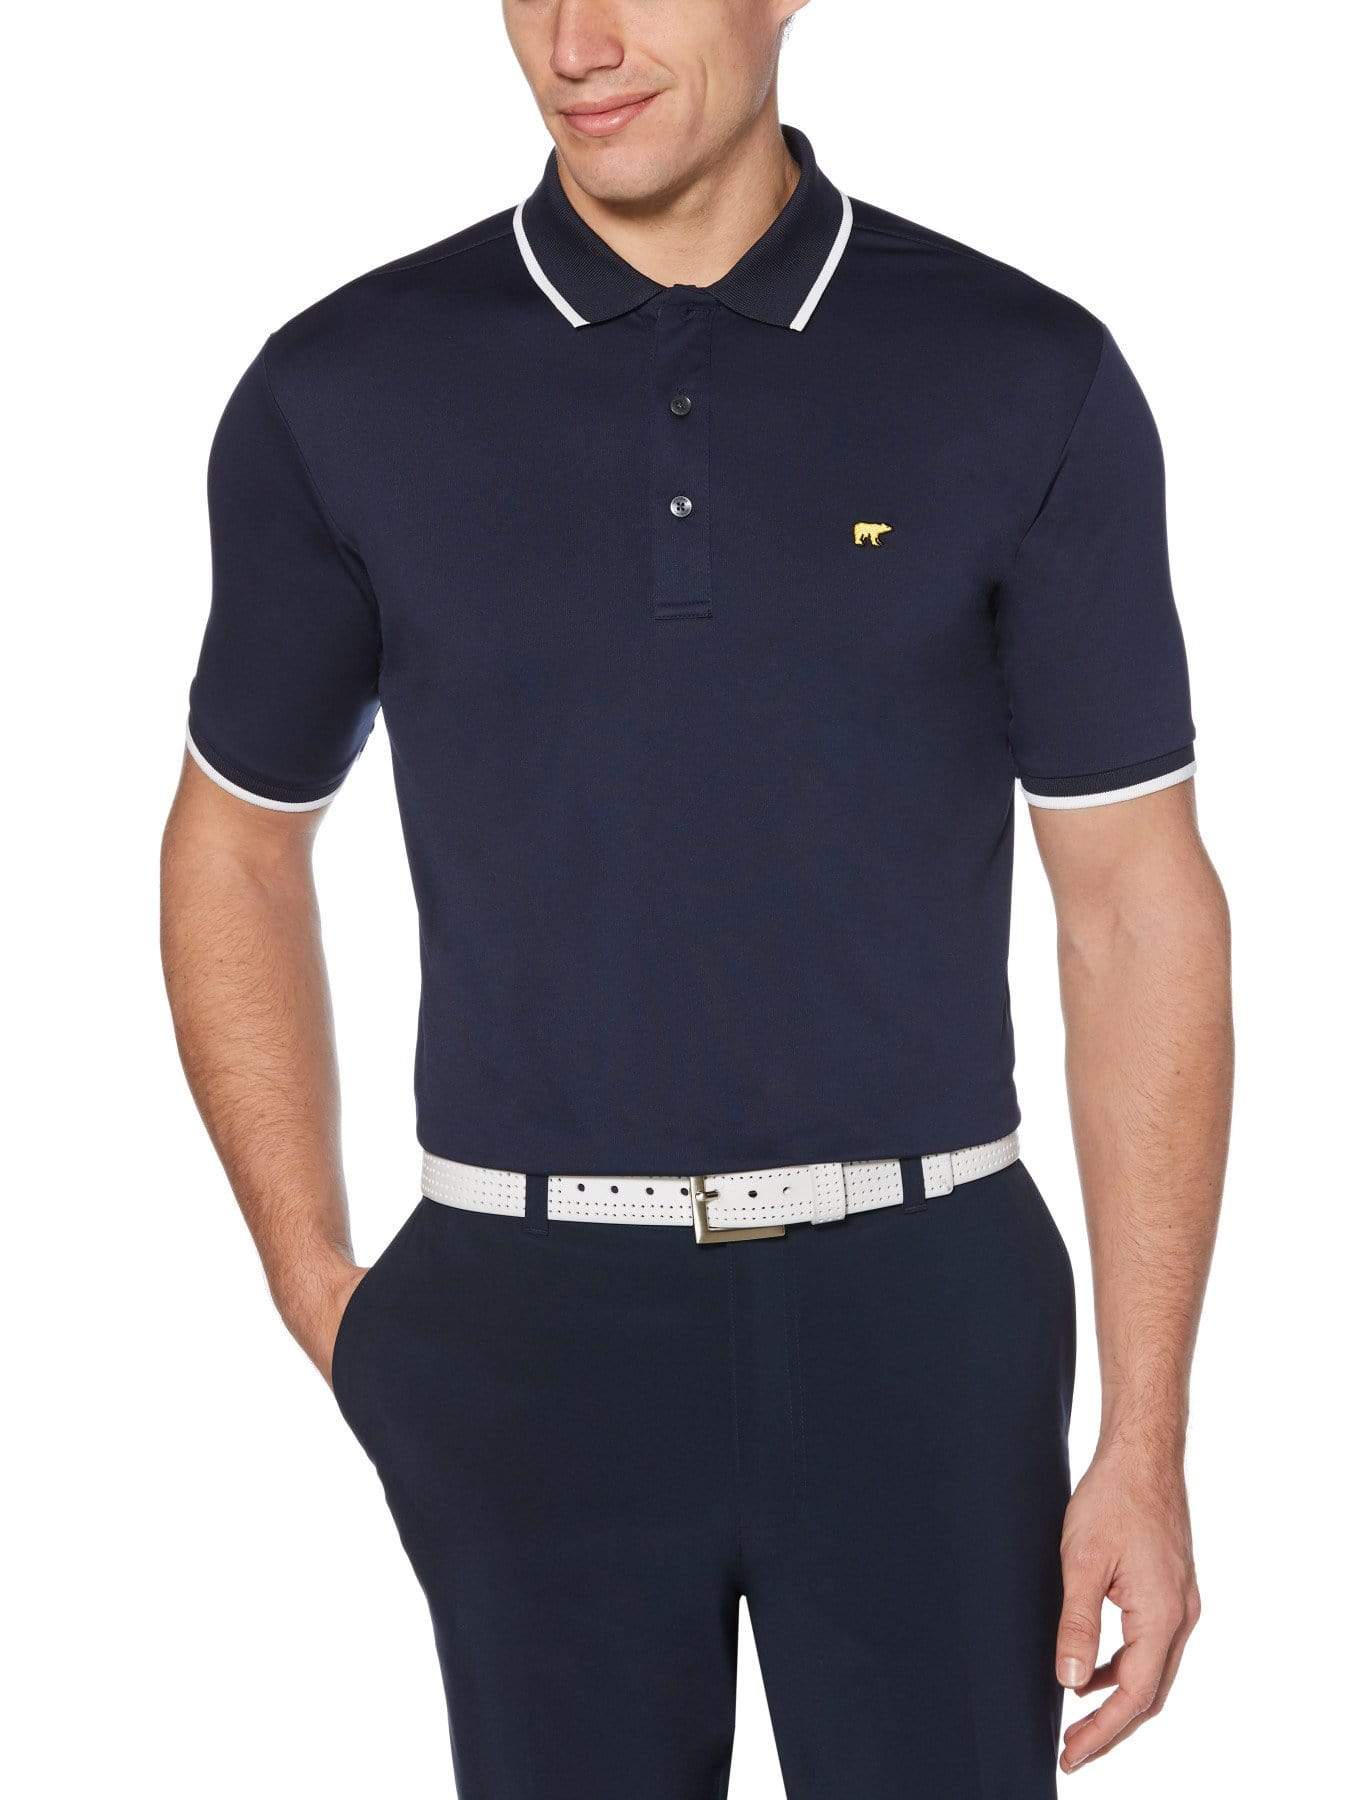 Jack Nicklaus Mens Solid Golf Polo Shirt w/ Cuff Tipping, Size Small, Classic Navy Blue, 100% Polyester | Golf Apparel Shop